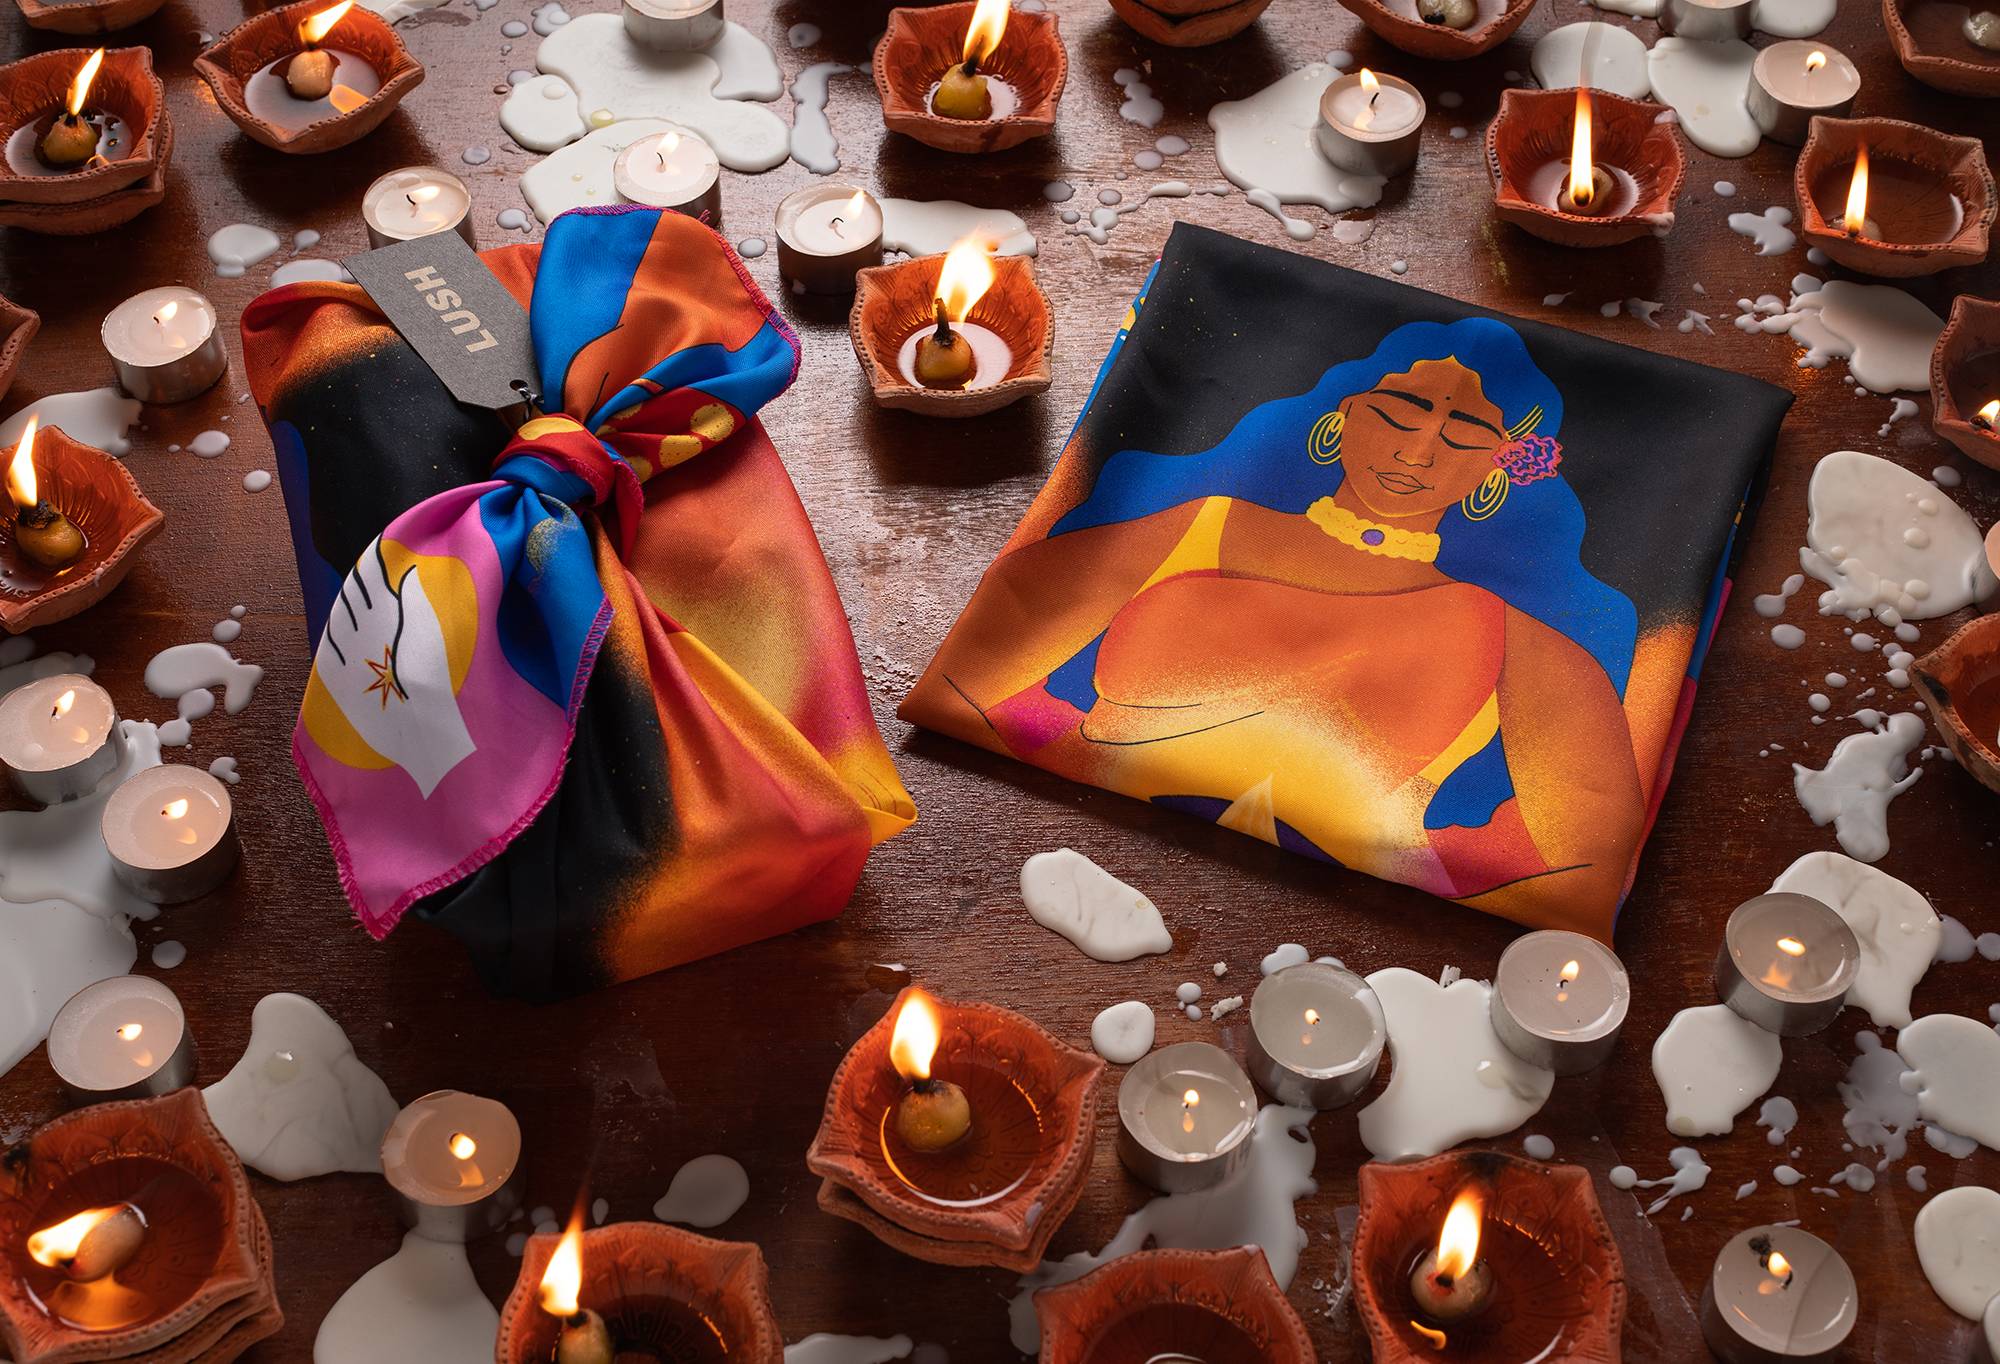 The knot wrap is shown folded and tied around a square package, laid on a wooden surface surrounded by lit tealight candles.